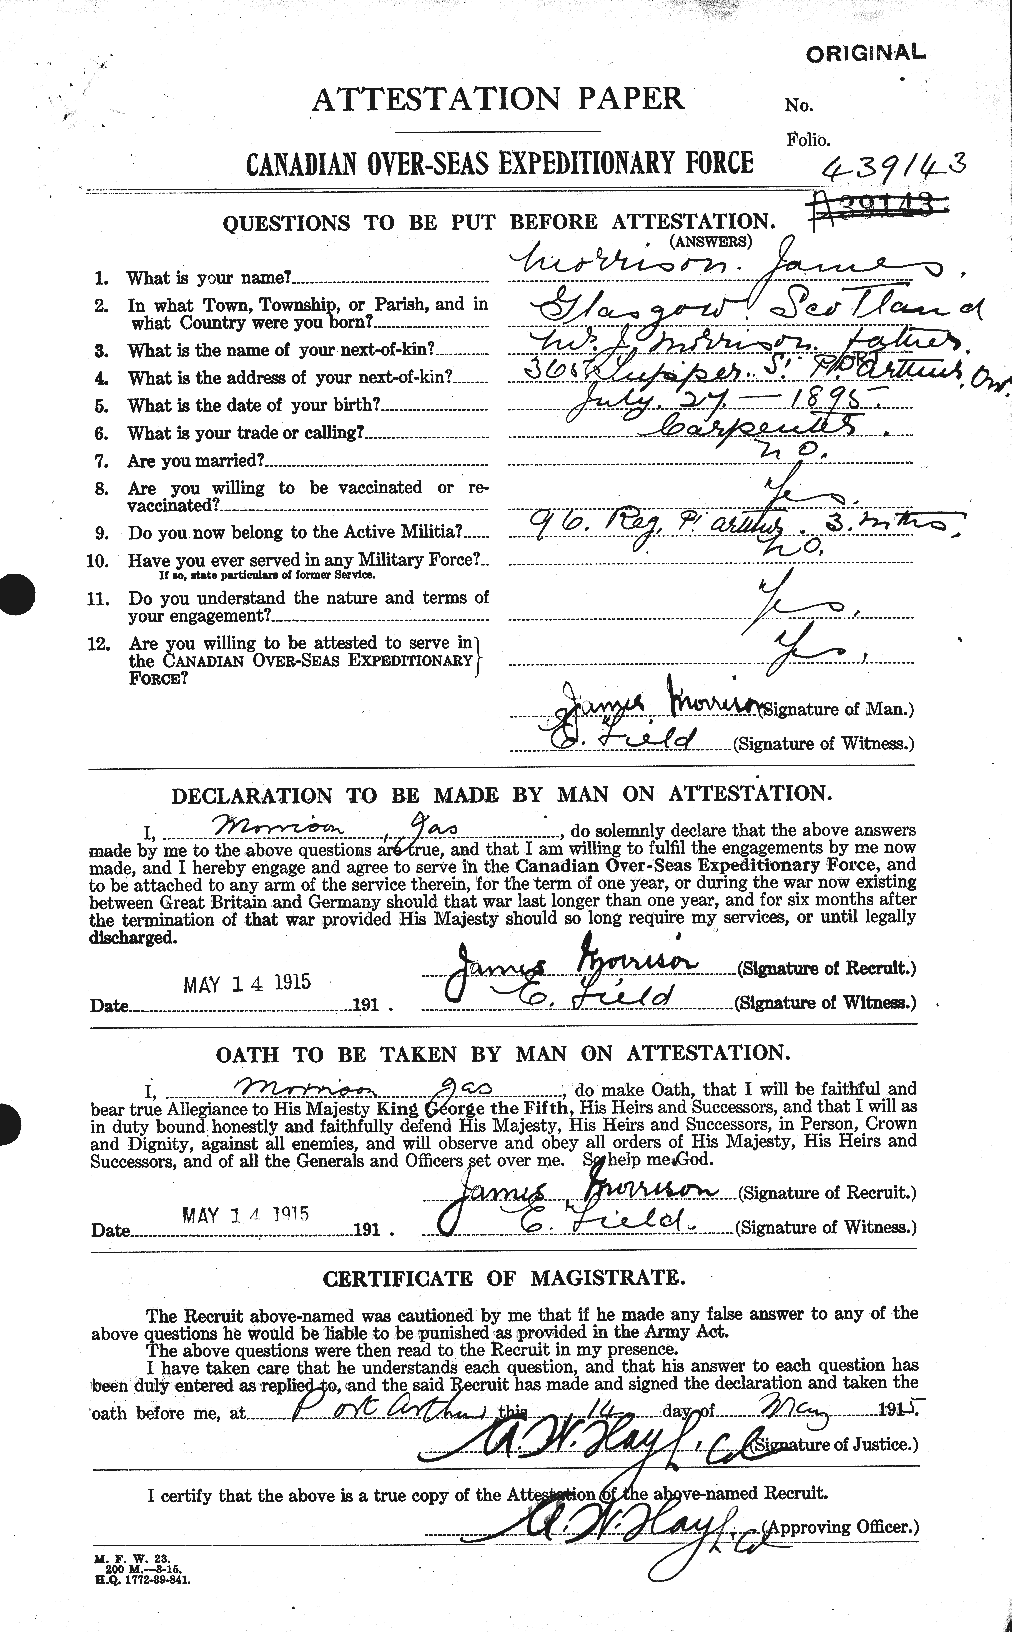 Personnel Records of the First World War - CEF 506898a